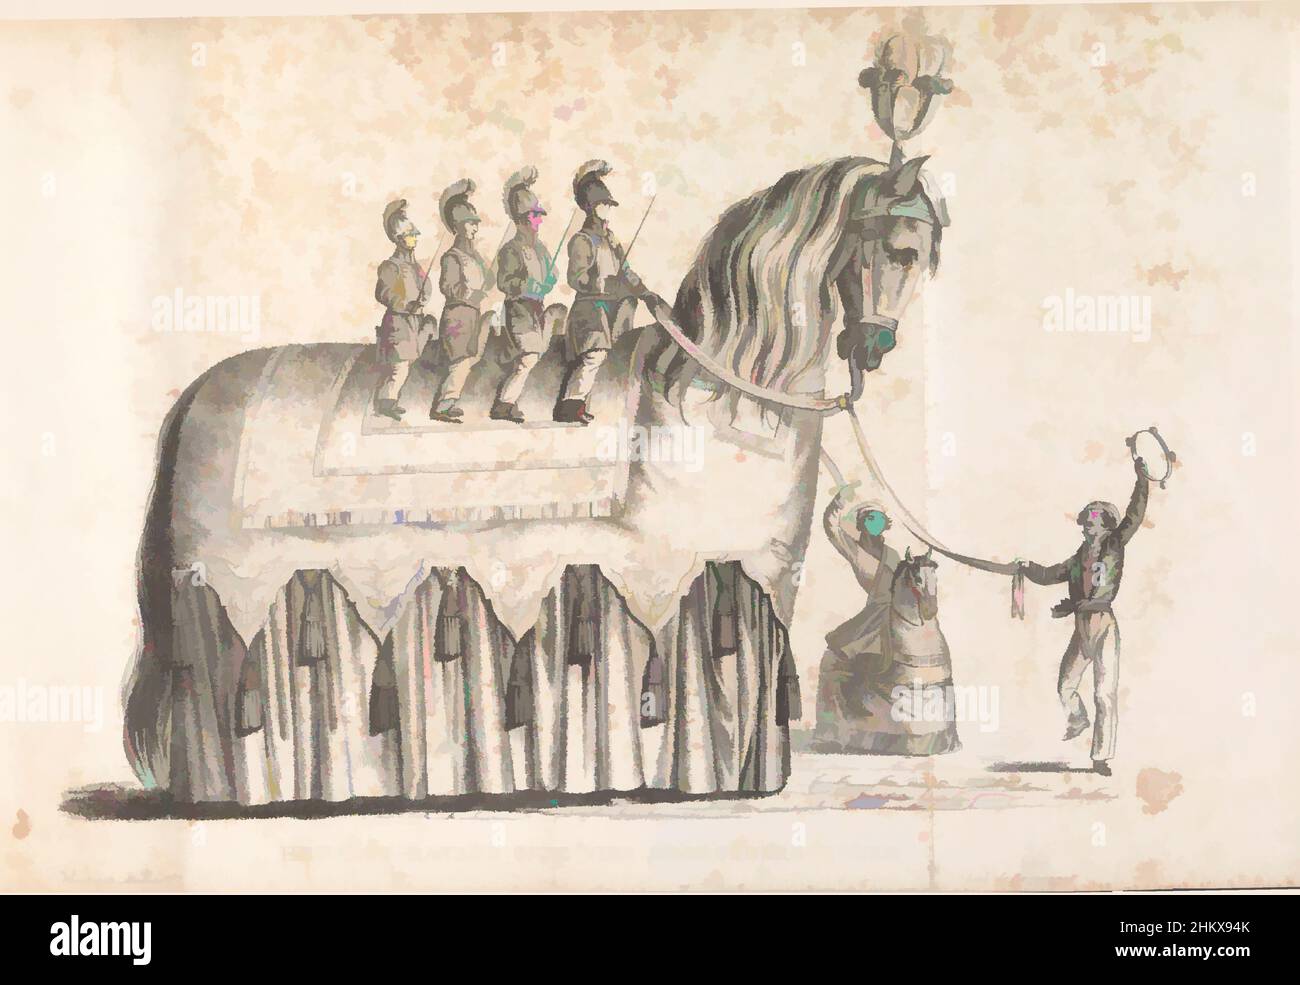 Art inspired by Ros Beiaard as a float in the procession for Saint Rombout, 1825, The Ros-Bayard ofte Vier Gebroeders Peerd, A float in the form of the horse Ros Beiaard on which the four Heemskinderen ride. Part of the circumambulation for Saint Rombout. The procession was held on June, Classic works modernized by Artotop with a splash of modernity. Shapes, color and value, eye-catching visual impact on art. Emotions through freedom of artworks in a contemporary way. A timeless message pursuing a wildly creative new direction. Artists turning to the digital medium and creating the Artotop NFT Stock Photo